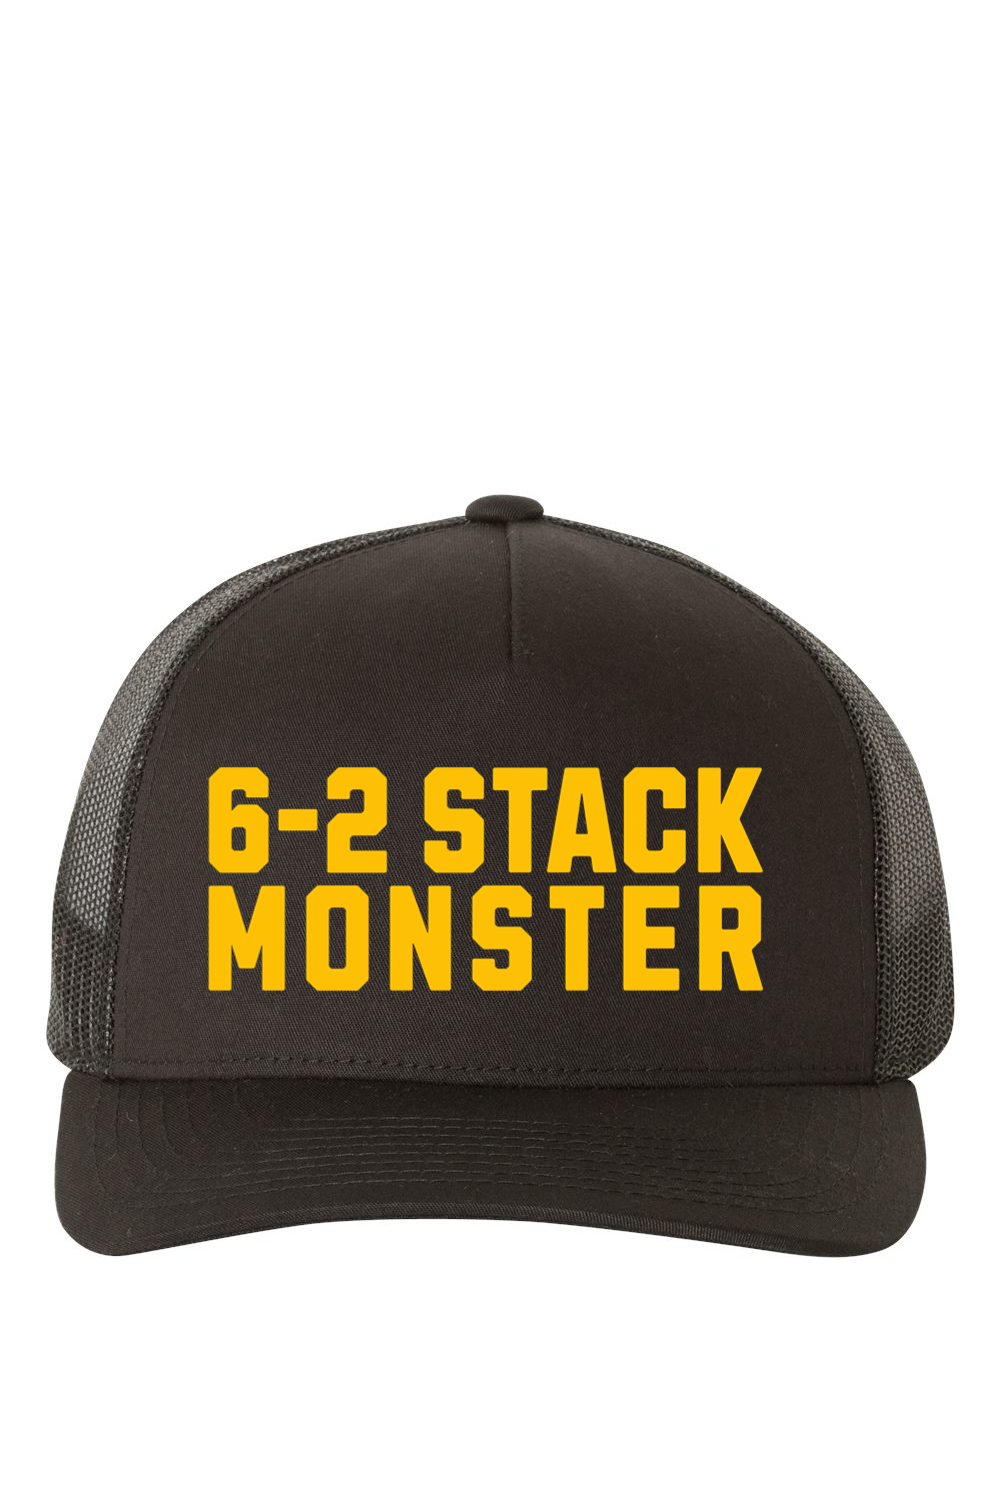 6-2 Stack Monster (All The Right Moves) - Classic Snapback Hat - Yinzylvania